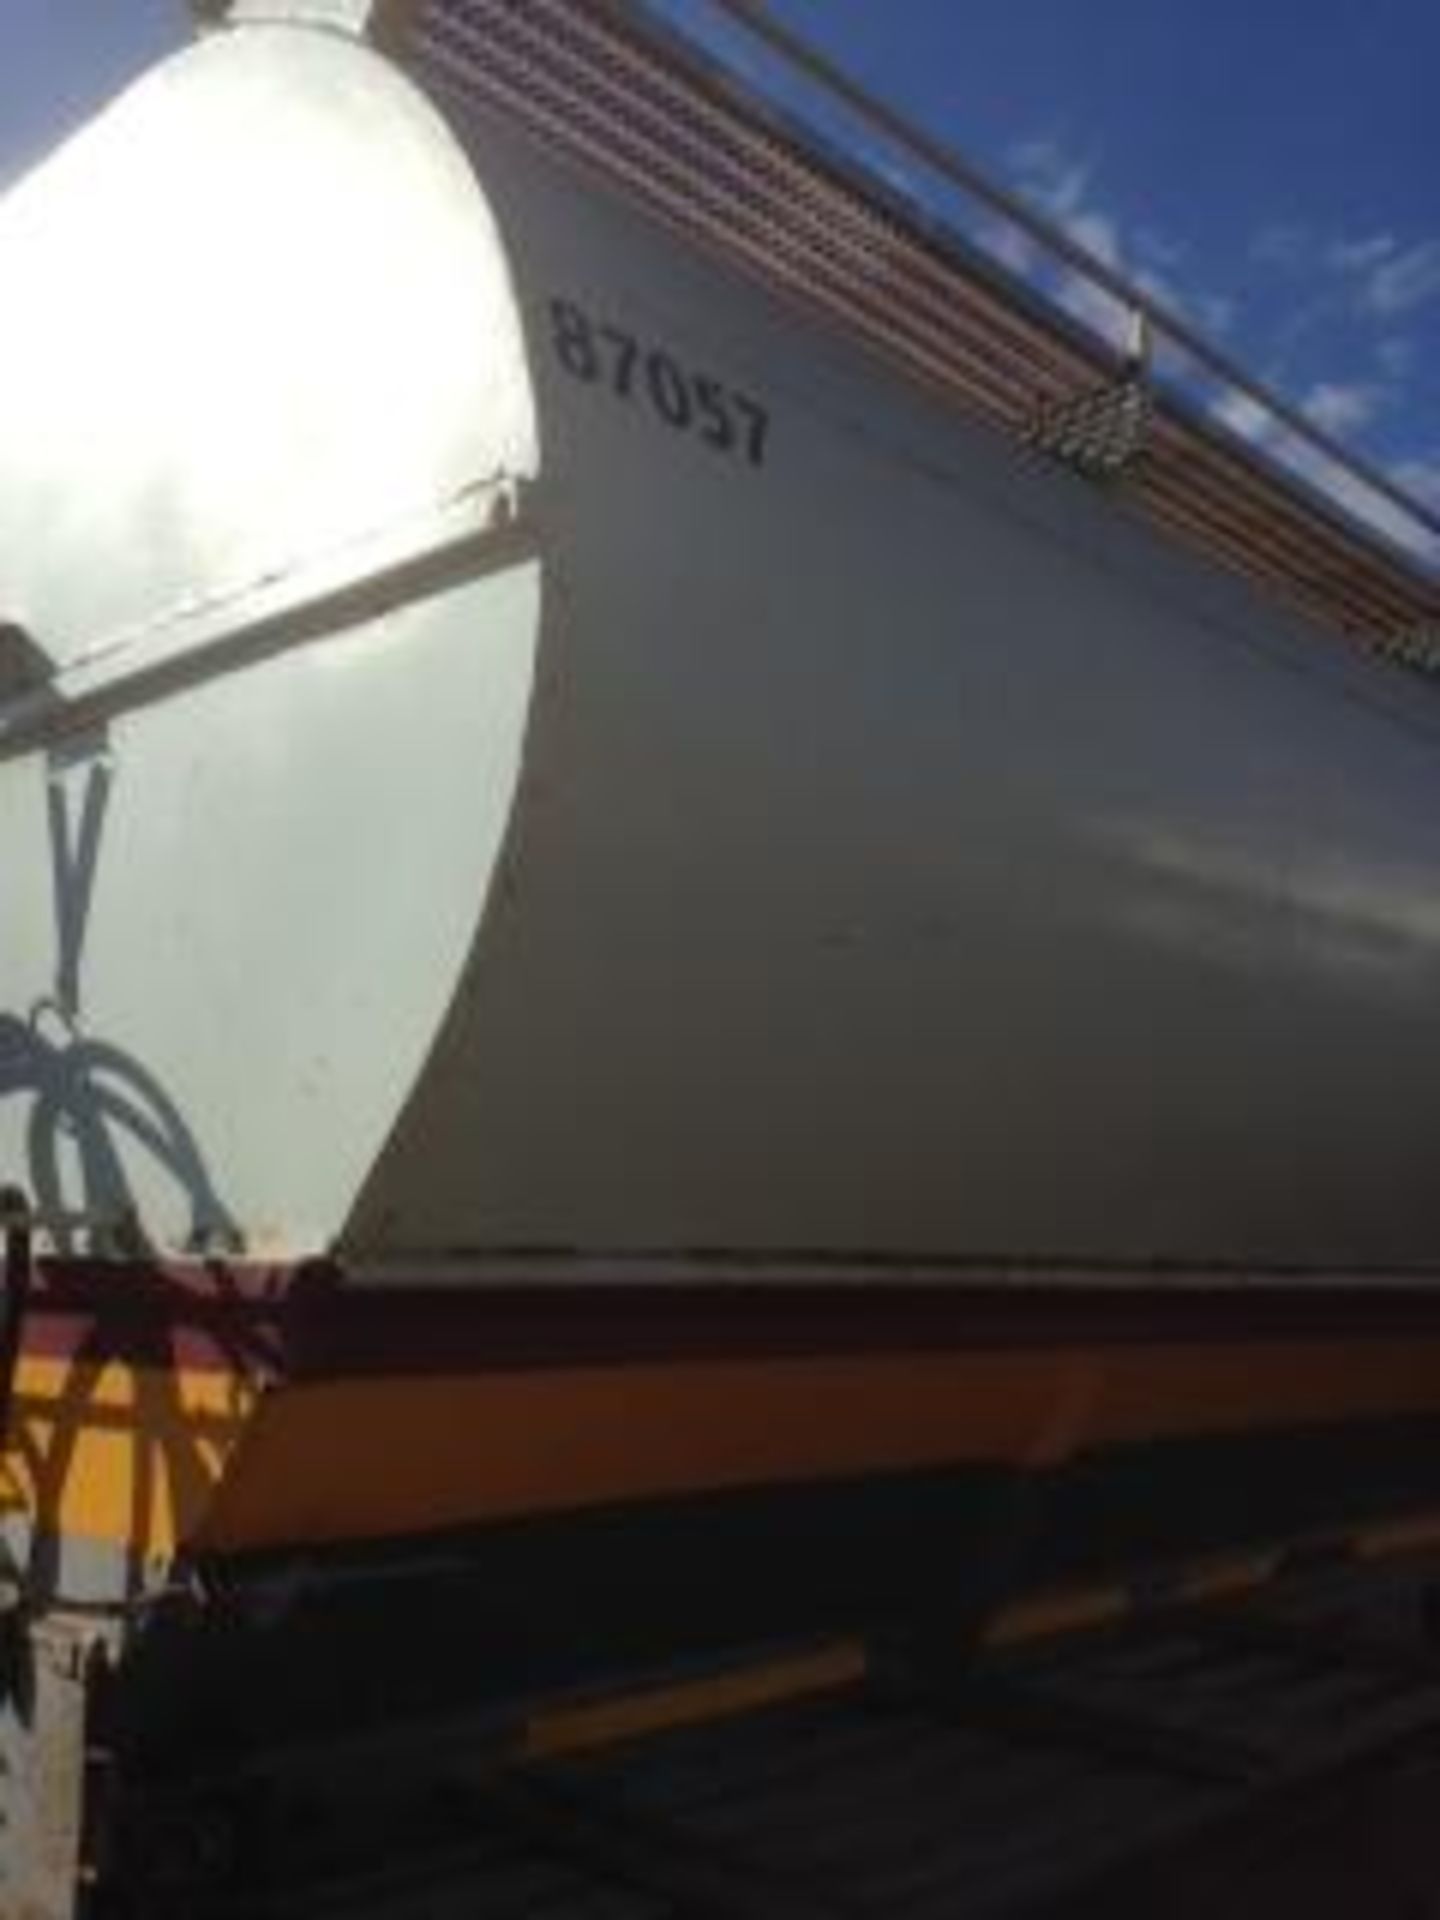 2008 AUGER TRI-AXLE AUGER BULK TANKER TRAILER CK12384 - Subject to Confirmation - Image 2 of 8